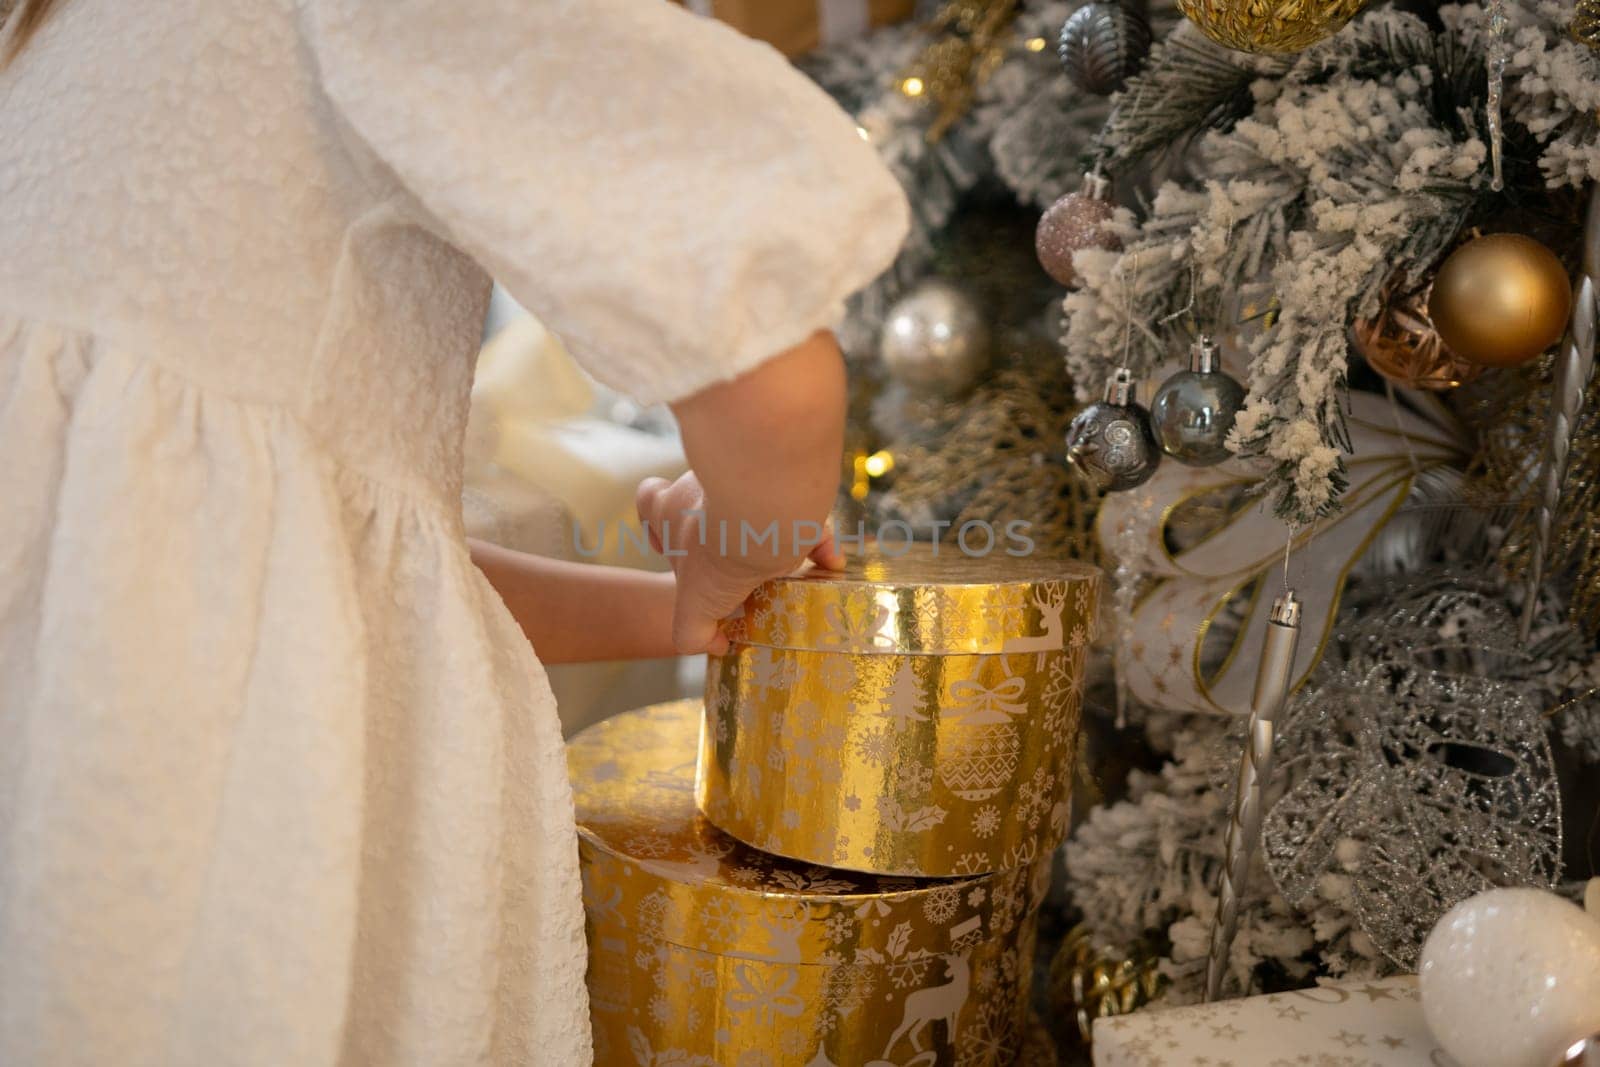 A woman is opening a gold box with a silver ball inside. The box is decorated with gold and silver ornaments, and the woman is wearing a white dress. The scene is set in a room with a Christmas tree. by Matiunina